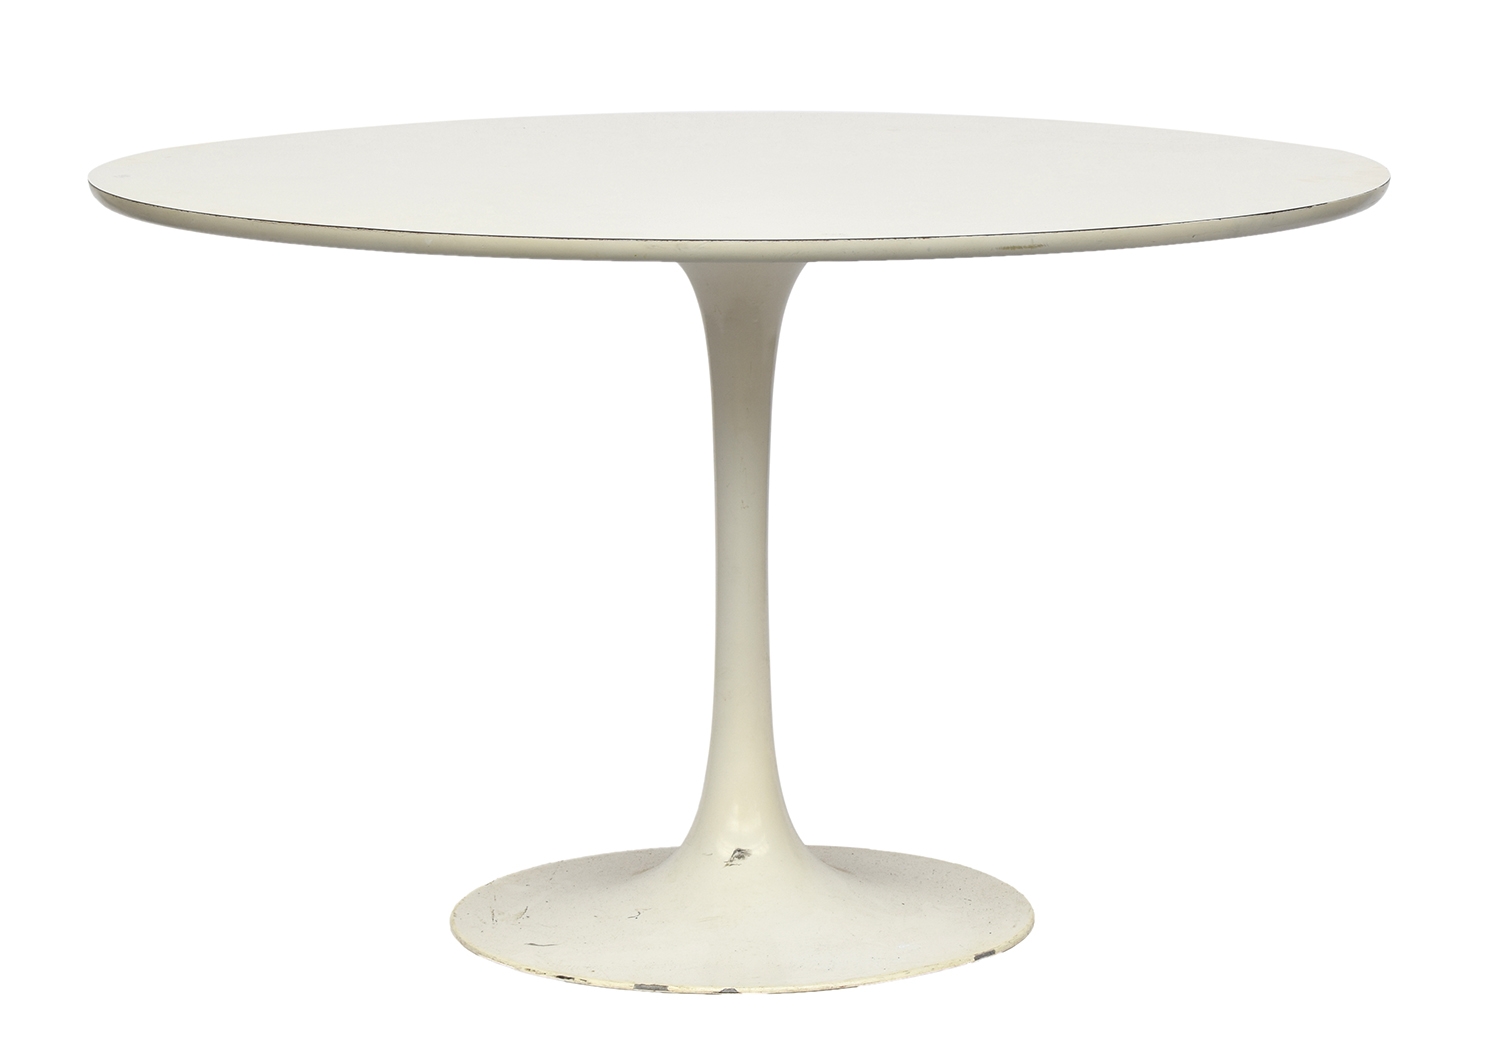 A white Knoll Eero Saarinen 'Tulip' style circular dining table with white formica top, 121cm - Image 2 of 4